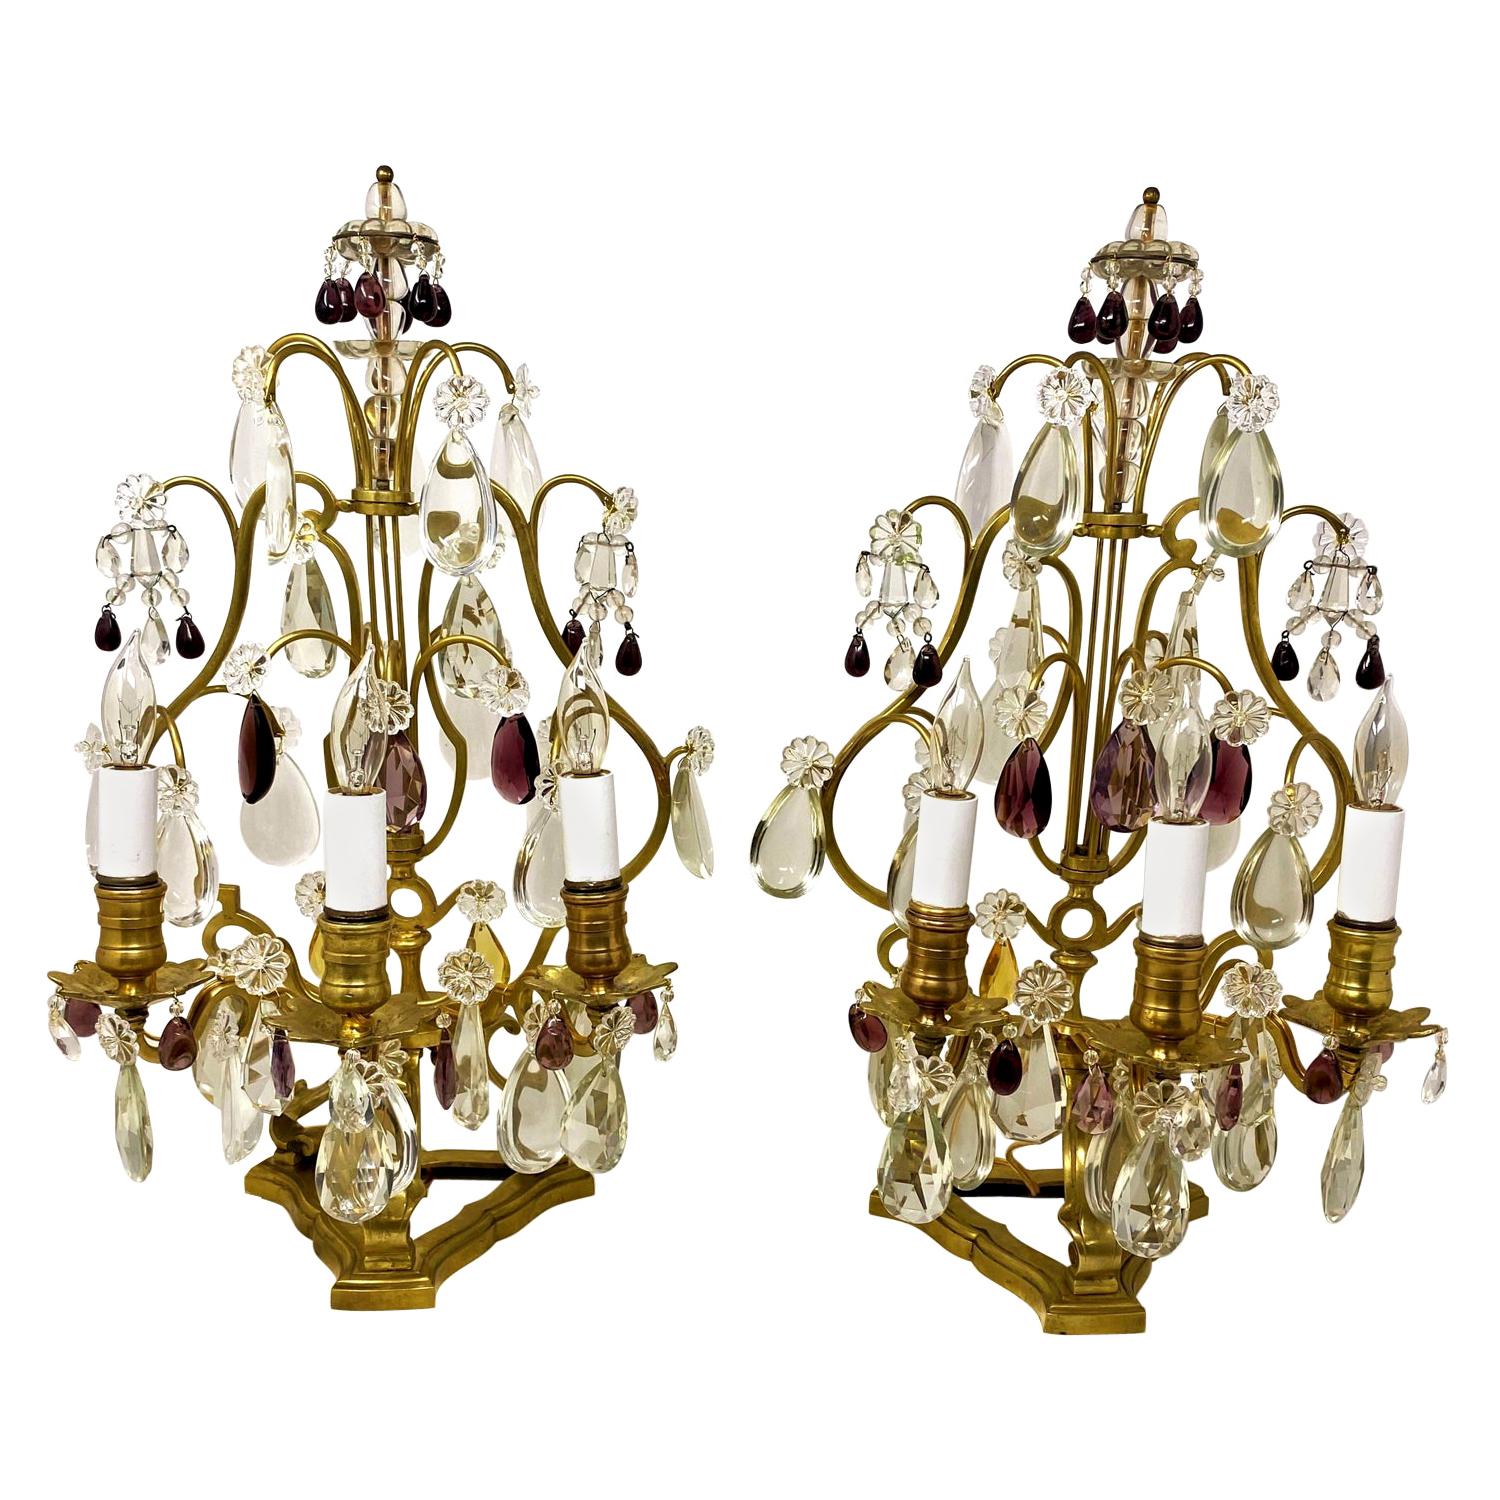 Pair of Antique French Gold Bronze and Crystal "Girondoles" Lamps, circa 1890